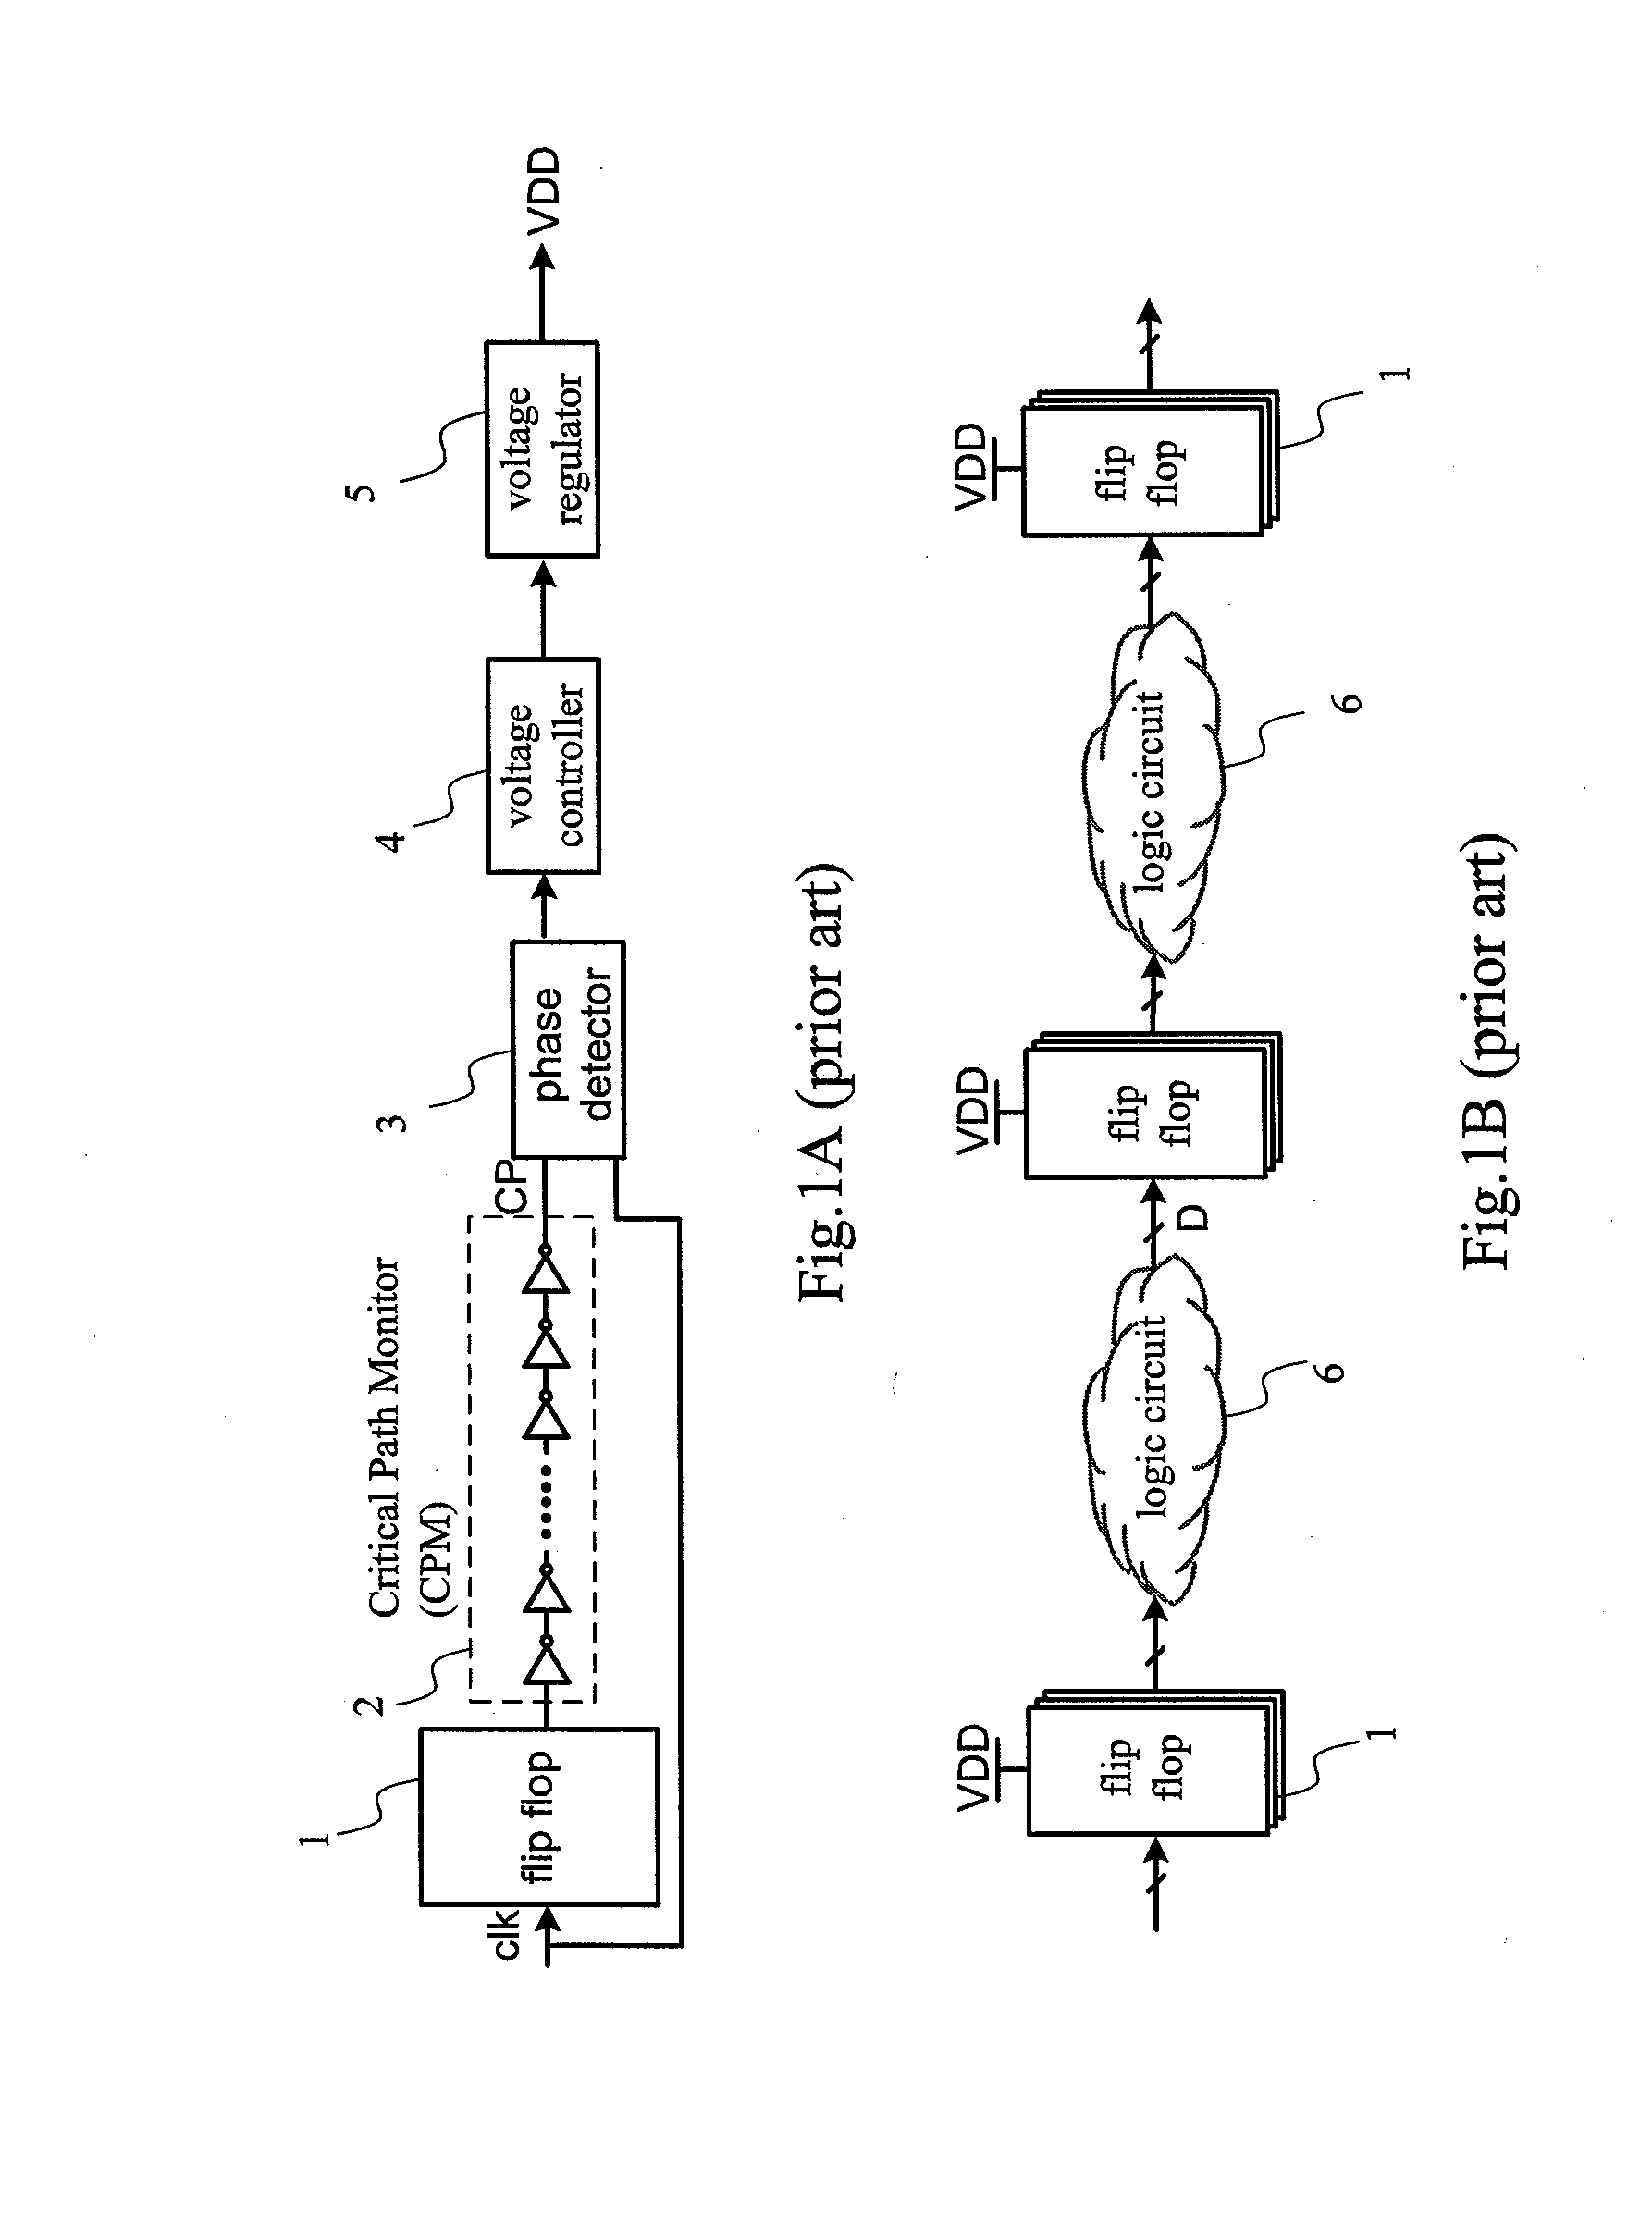 Dynamic voltage scaling system having time borrowing and local boosting capability